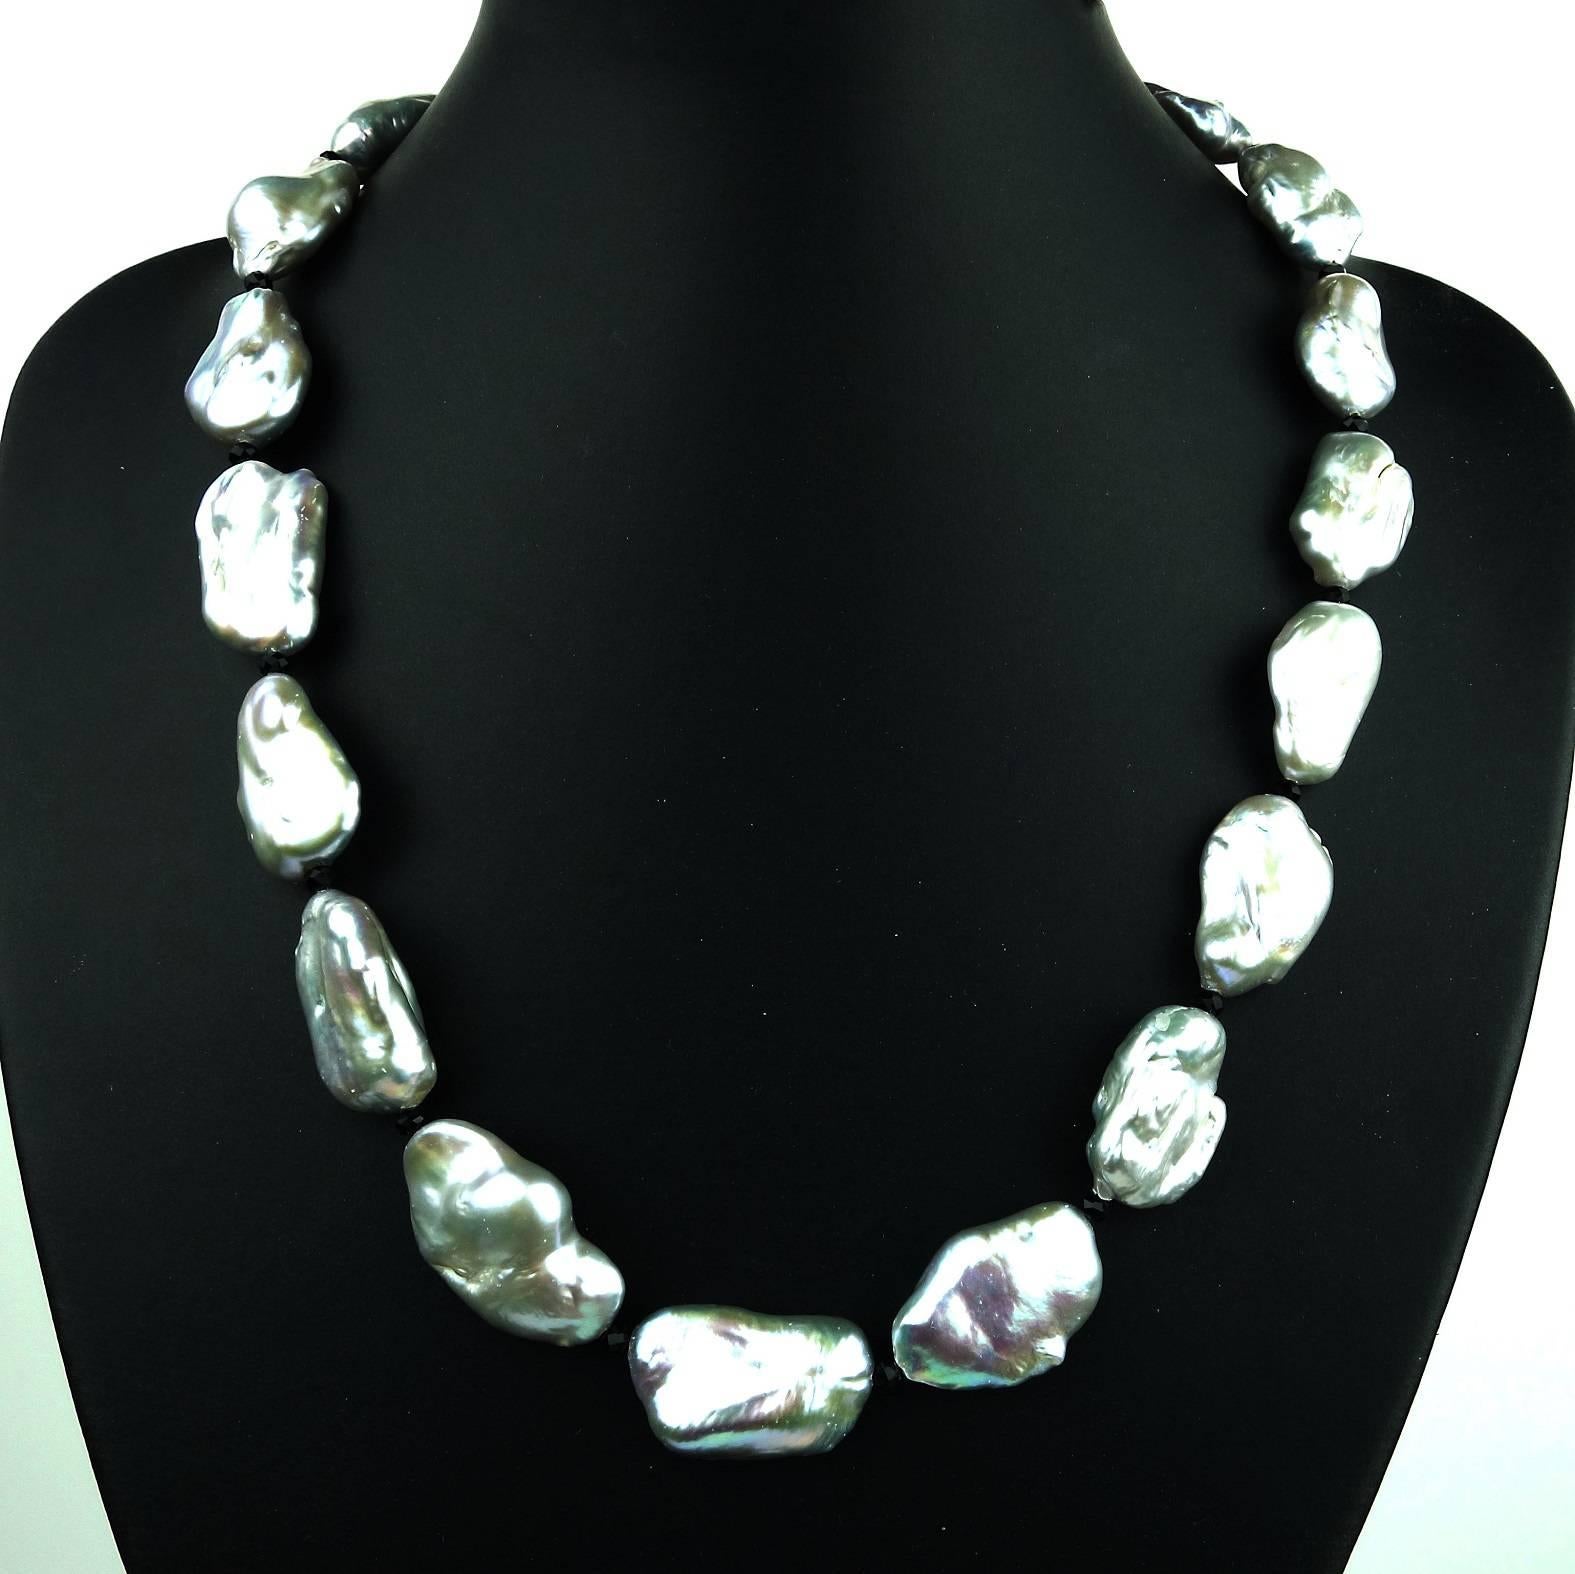 Iridescent Silvery Baroque Pearl Necklace 2